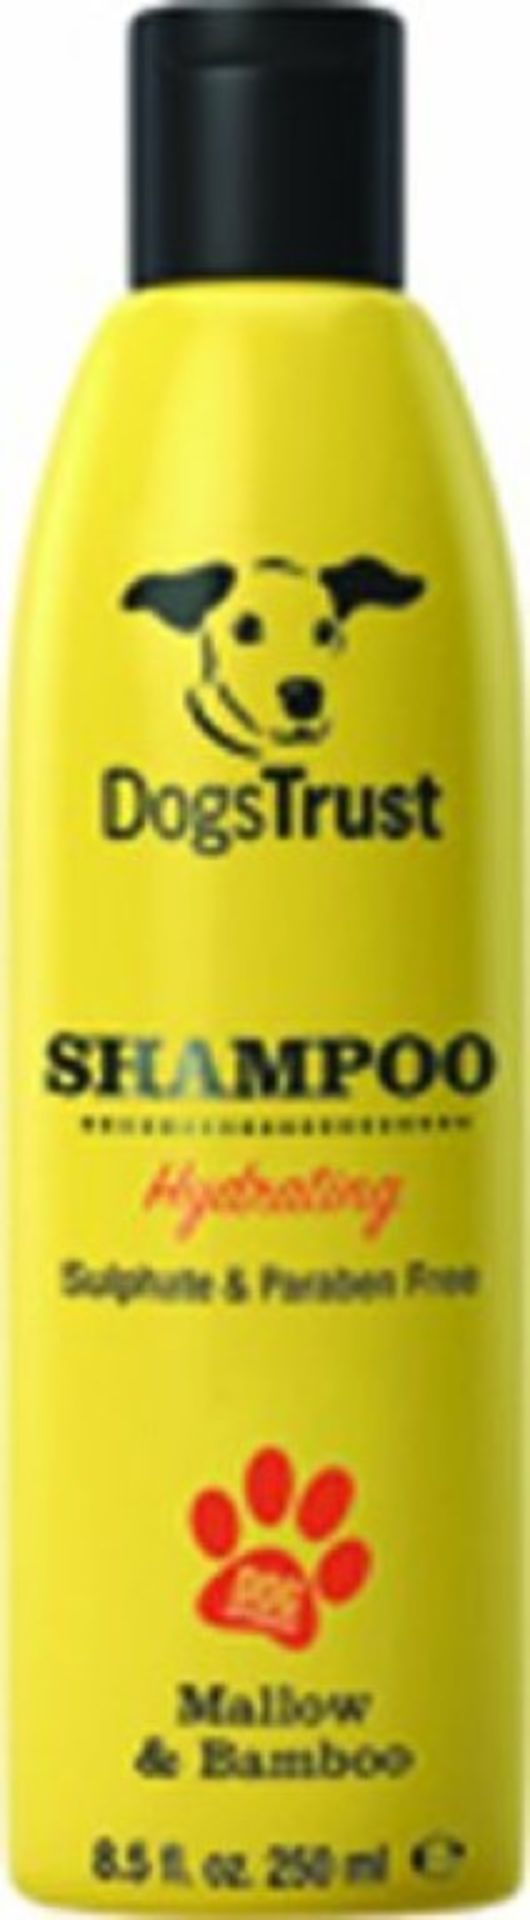 60 x Various Dogs Trust Shampoos and Conditioners - Brand New Stock - CL028 - Includes No Tears, - Image 9 of 16